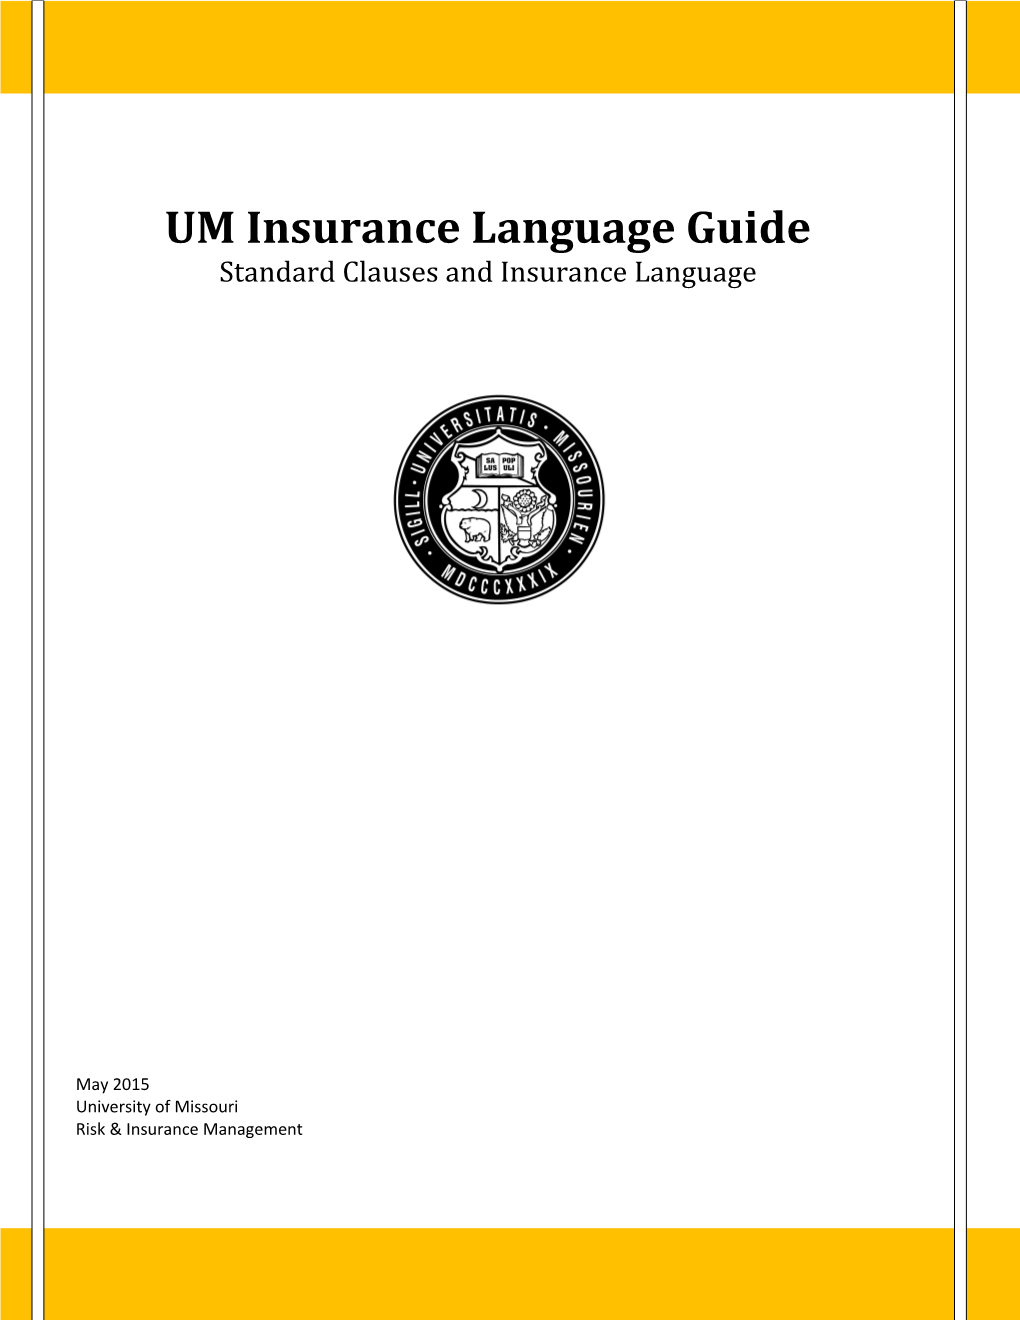 Standard Clauses and Insurance Language